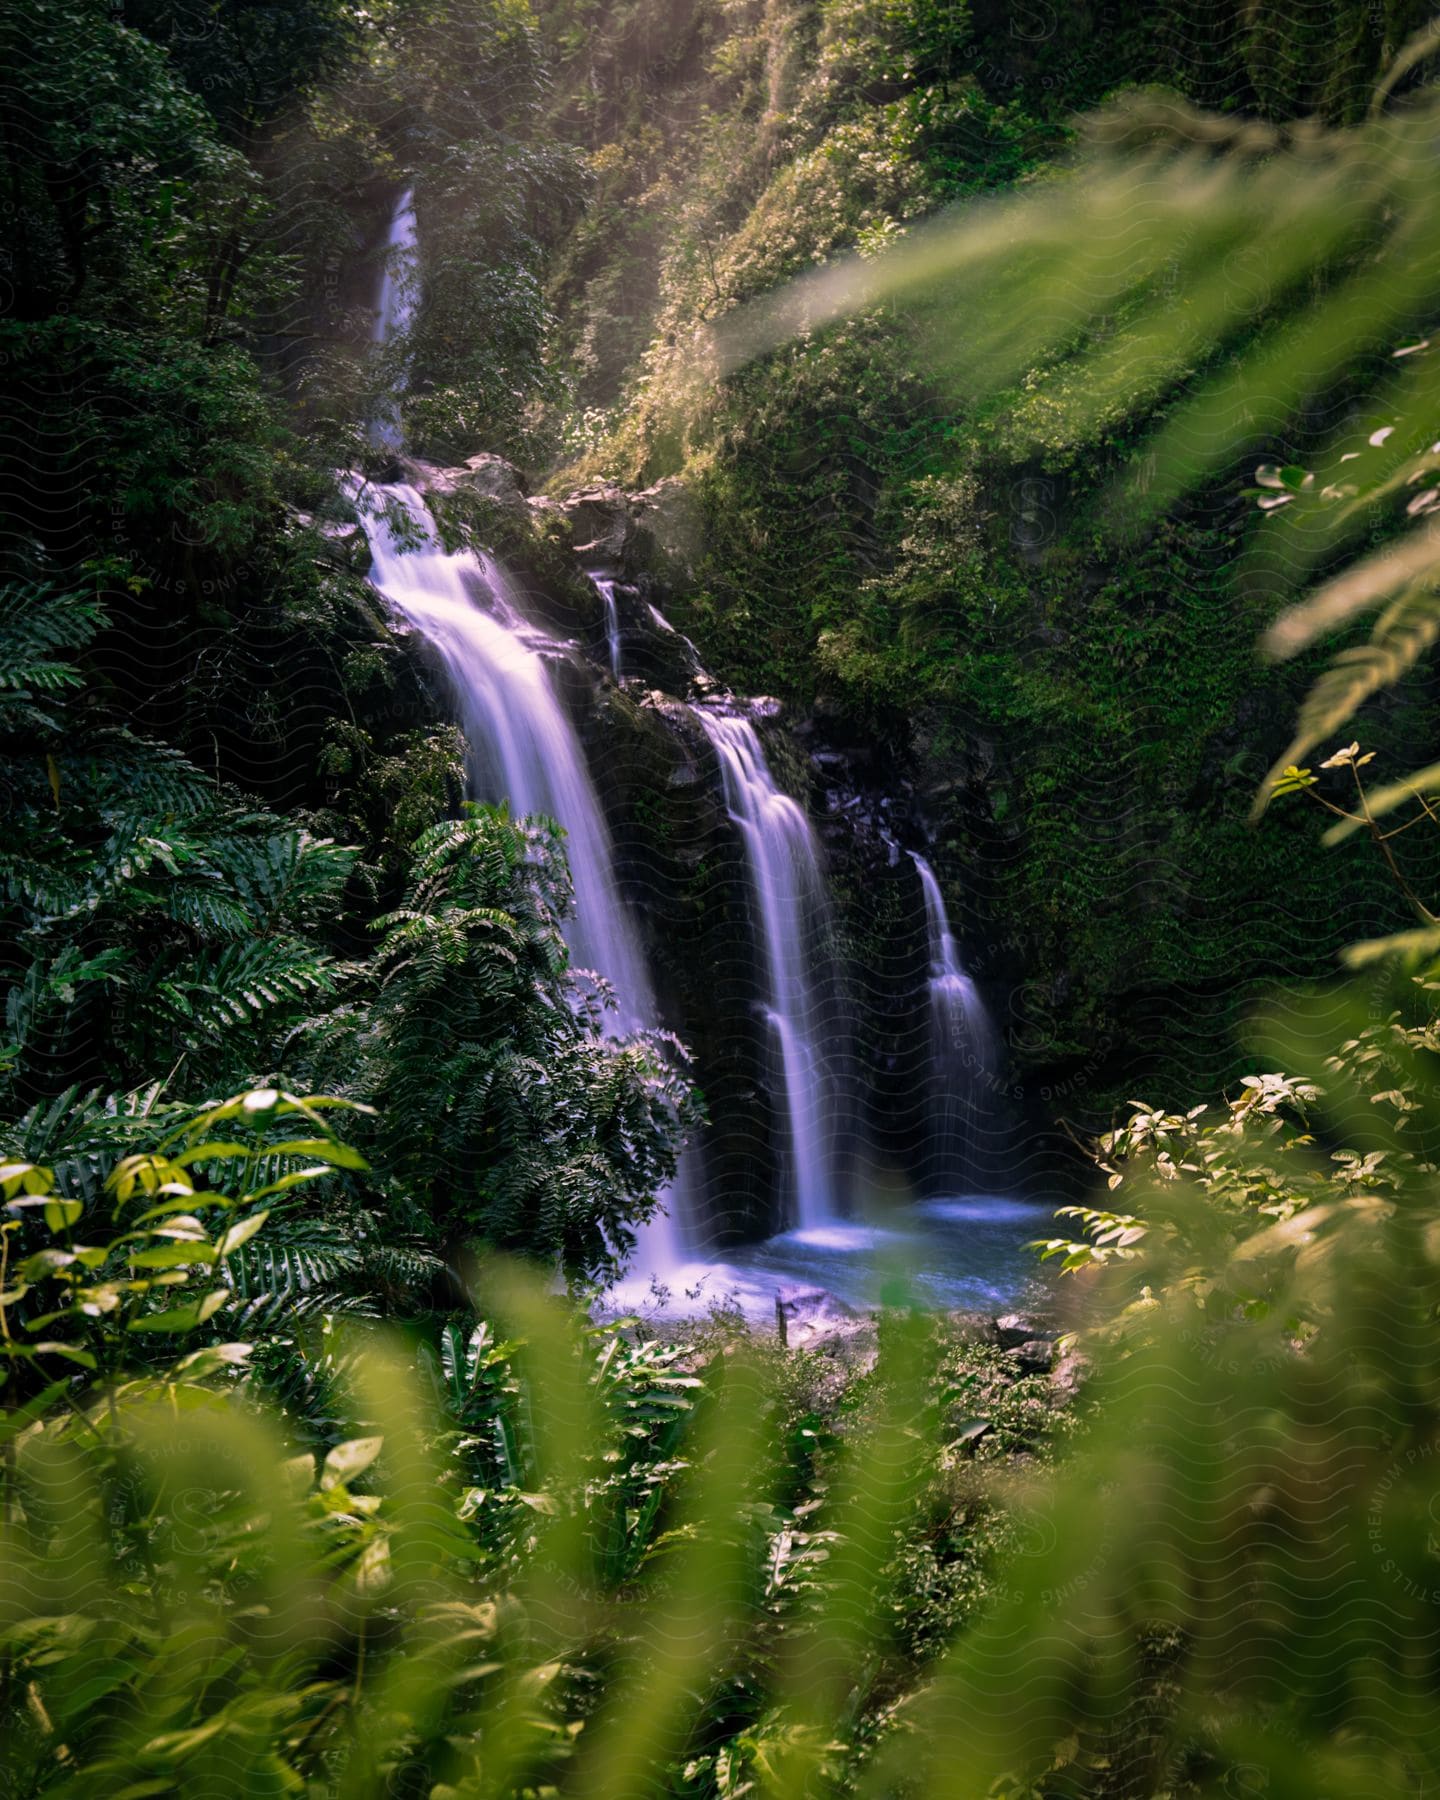 Waterfall with multiple streams of water falling into a lake surrounded by vegetation in the forest.